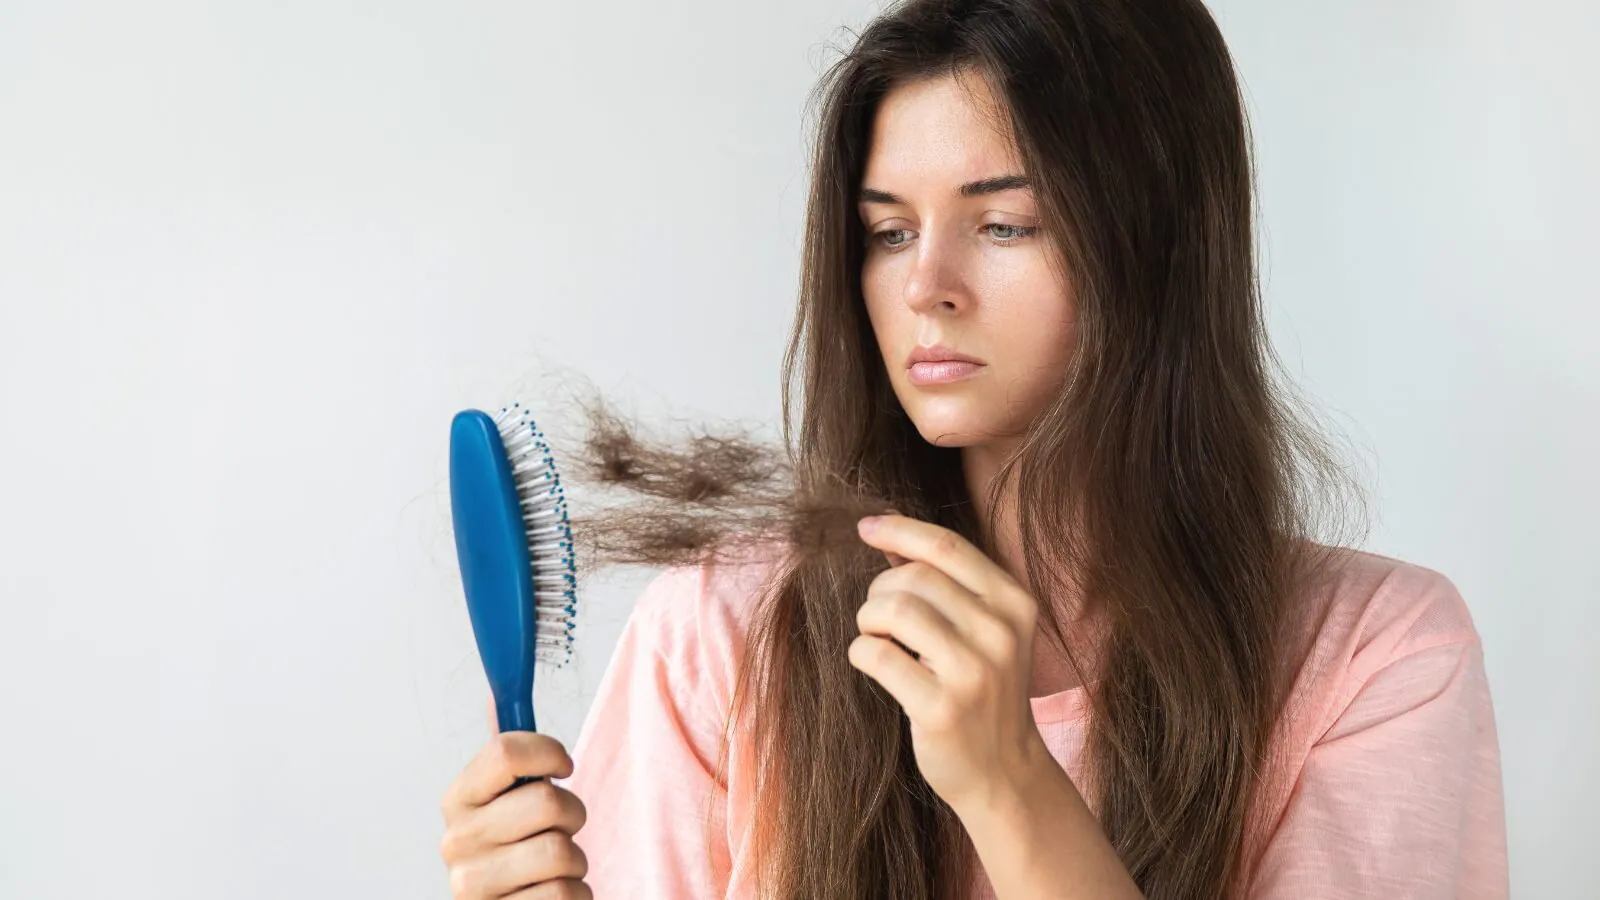 A girl taking out hairs from hair brush